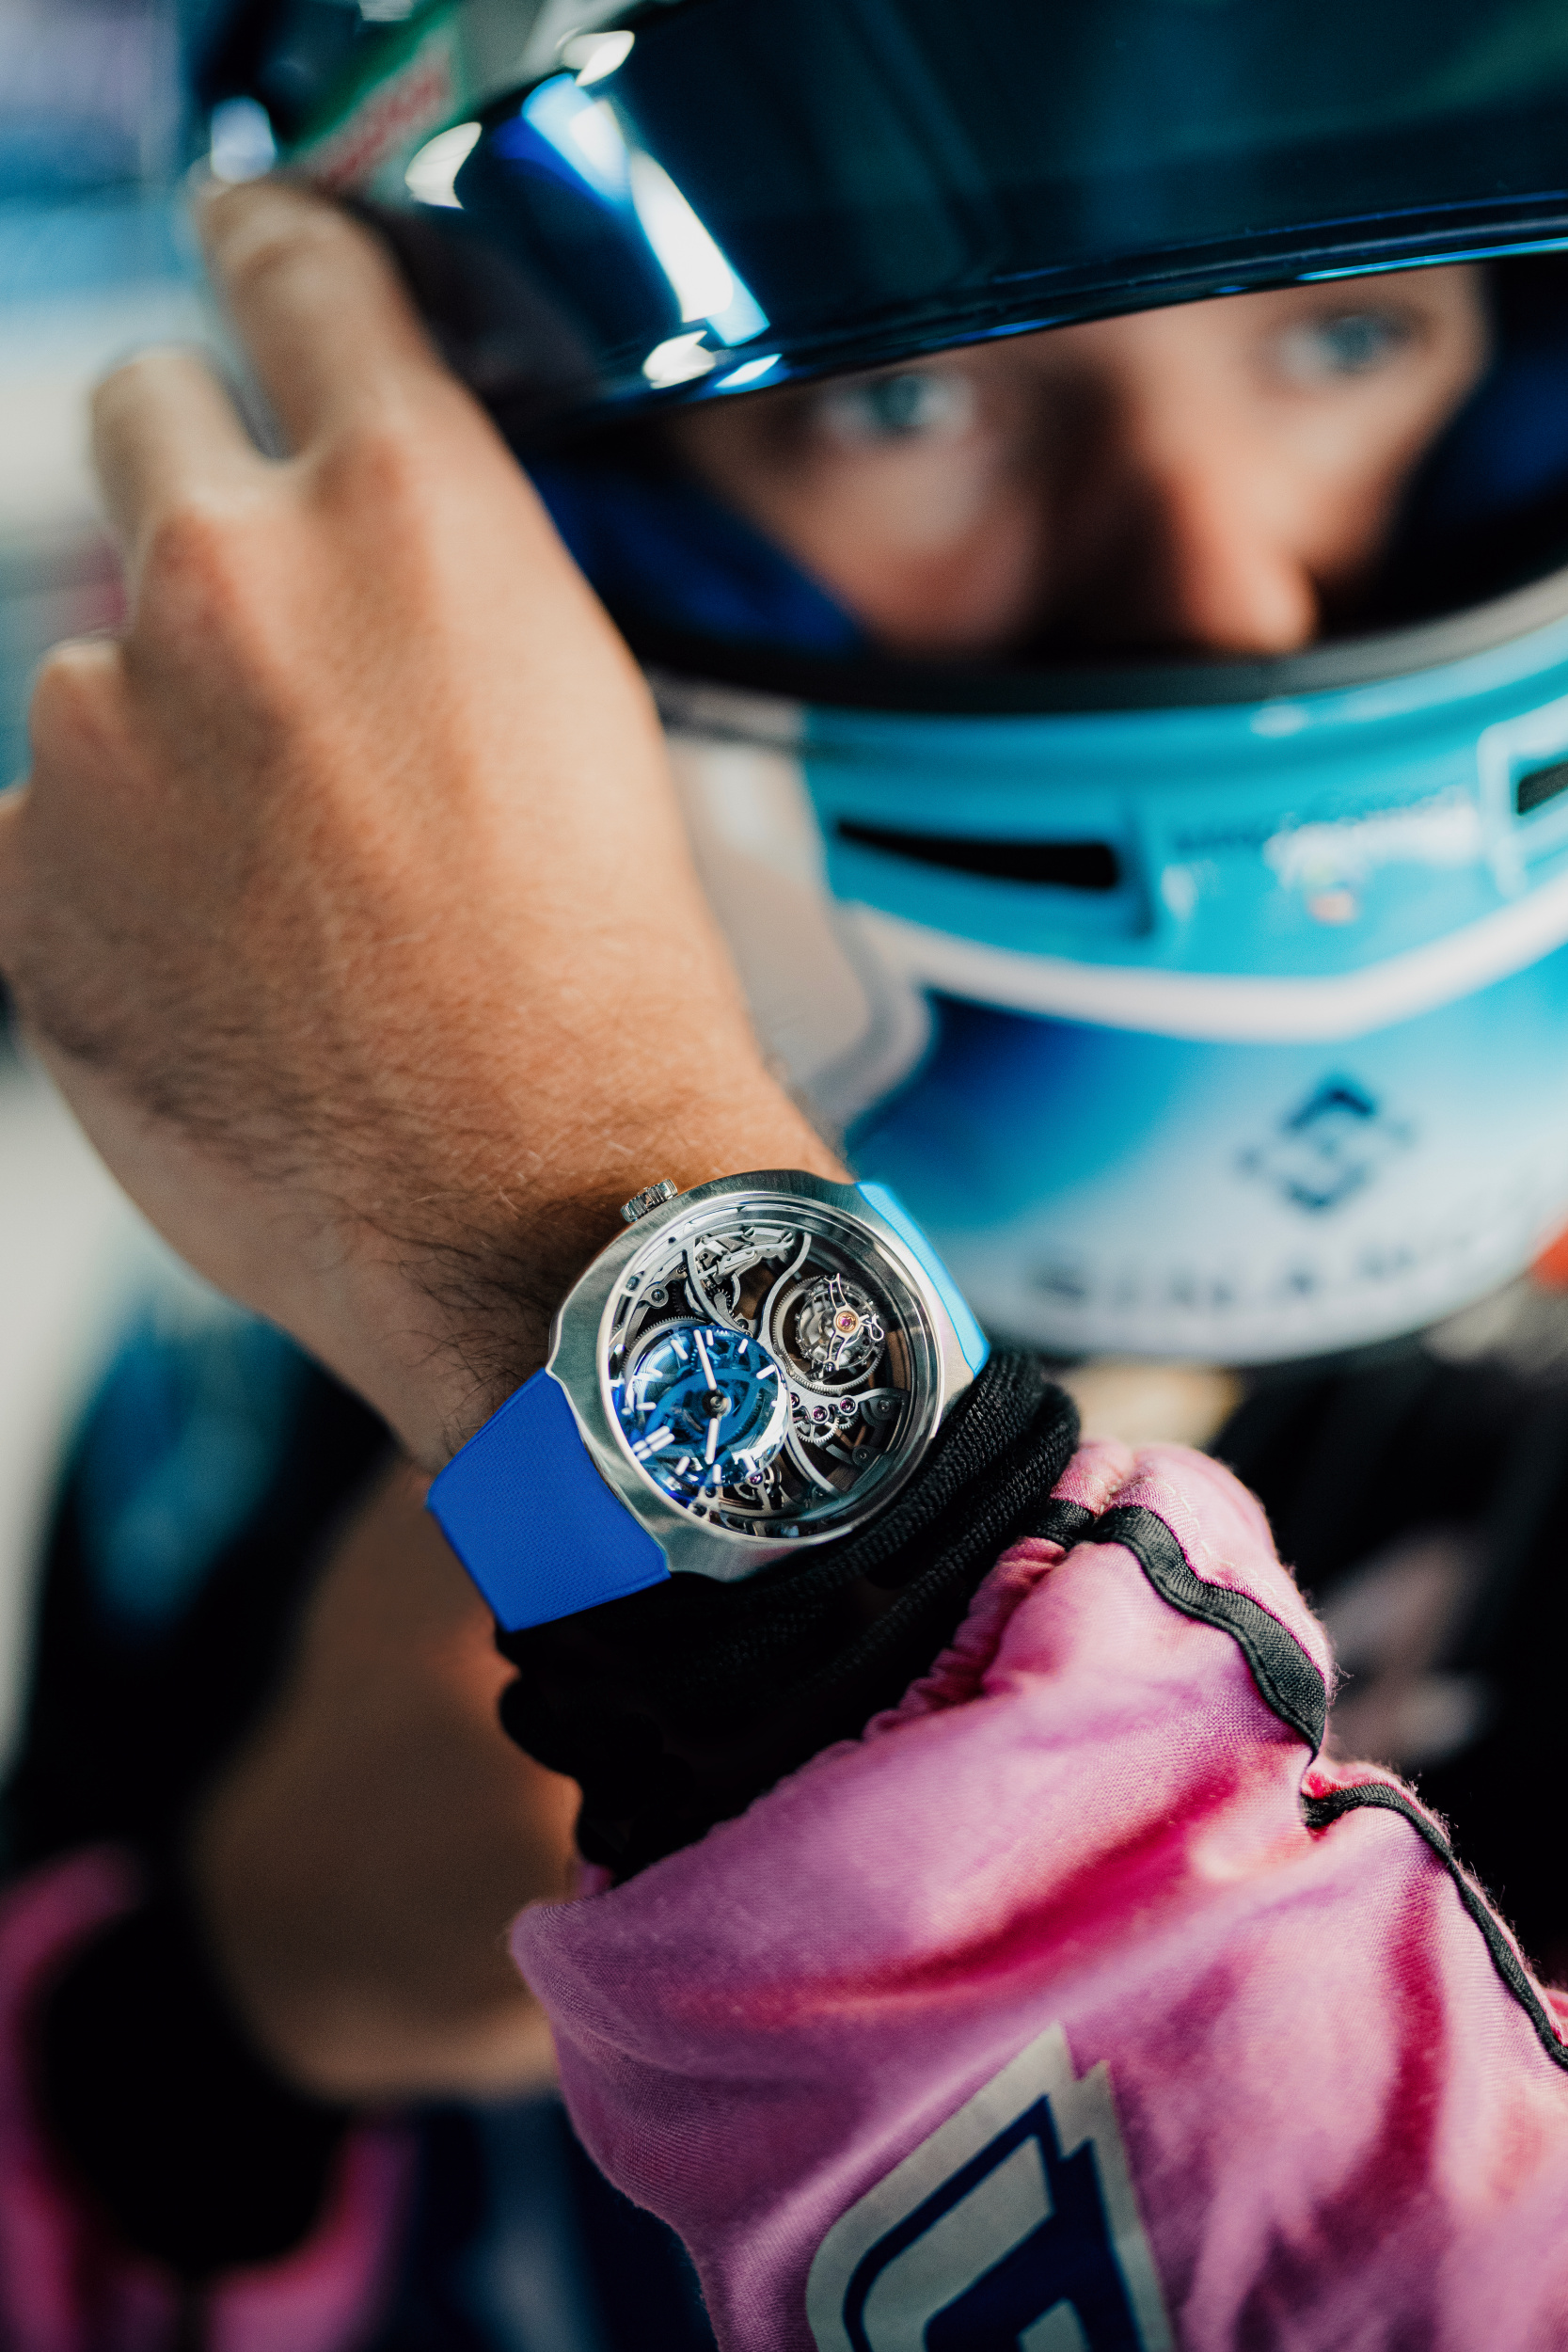 H. Moser & Cie. announced its collaboration with BWT Alpine F1 Team driver Pierre Gasly